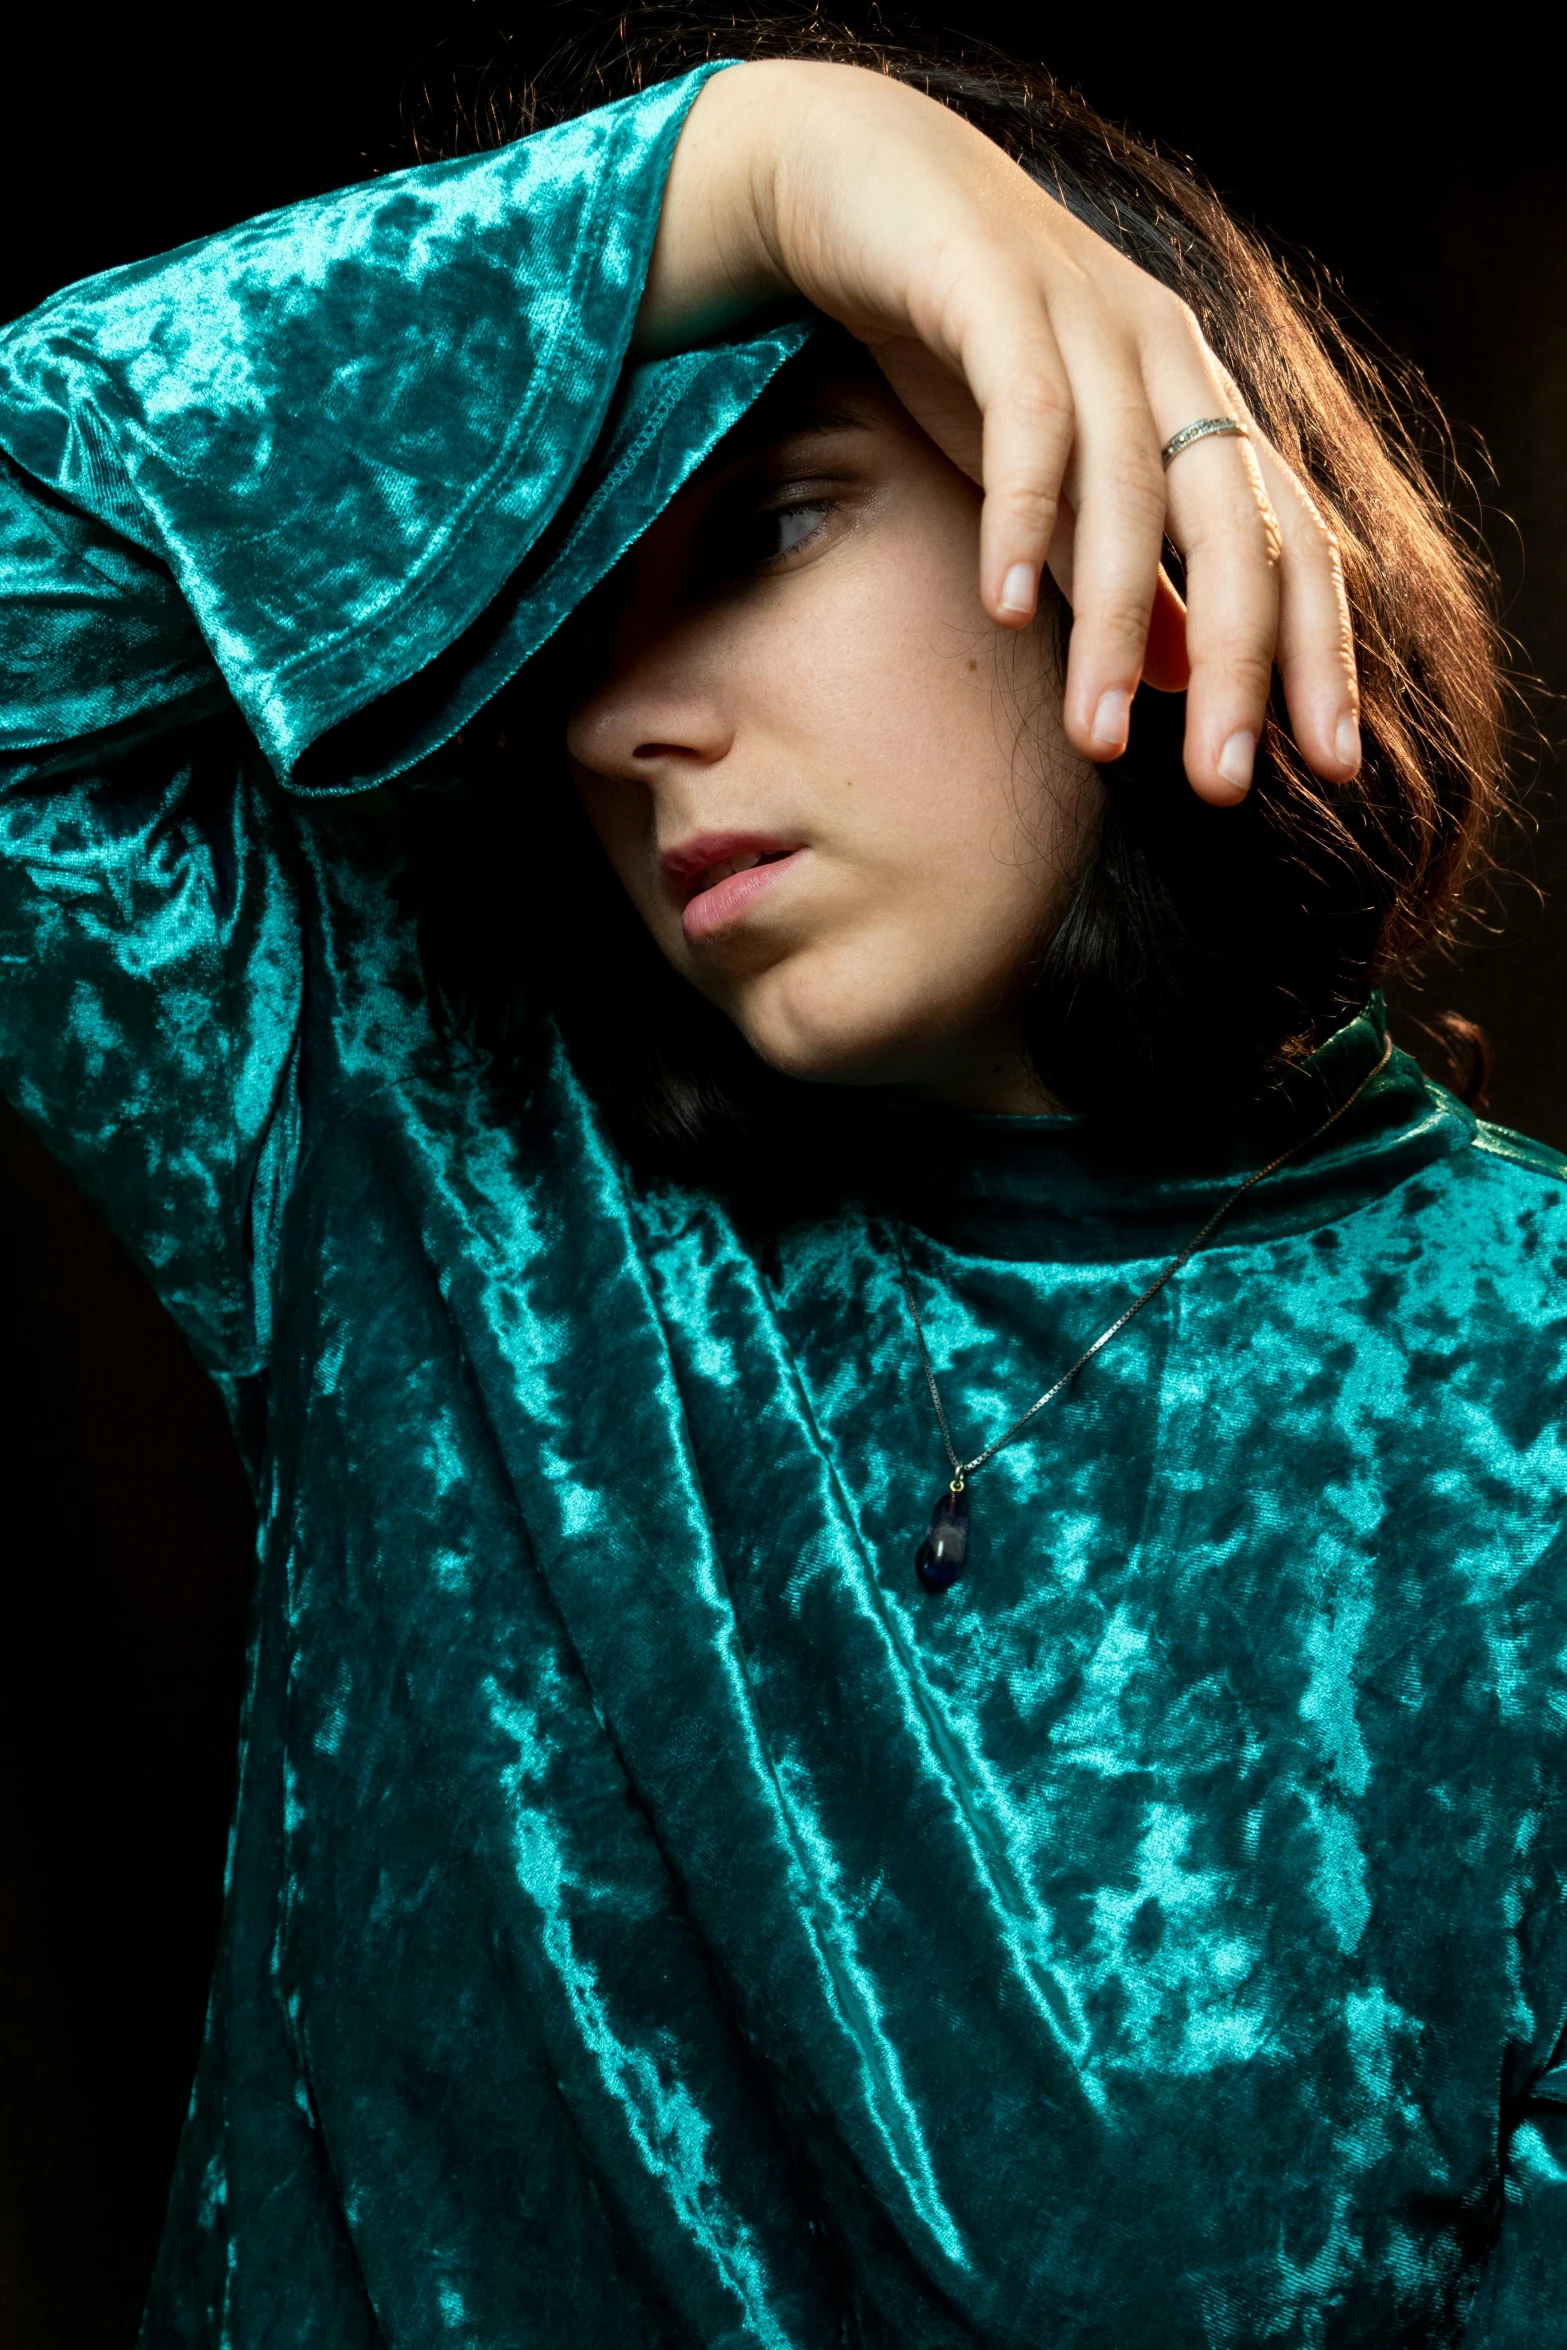 a close up of a person holding a cell phone, an album cover, inspired by Elsa Bleda, private press, dressed in a green robe, portrait androgynous girl, teal, brocade